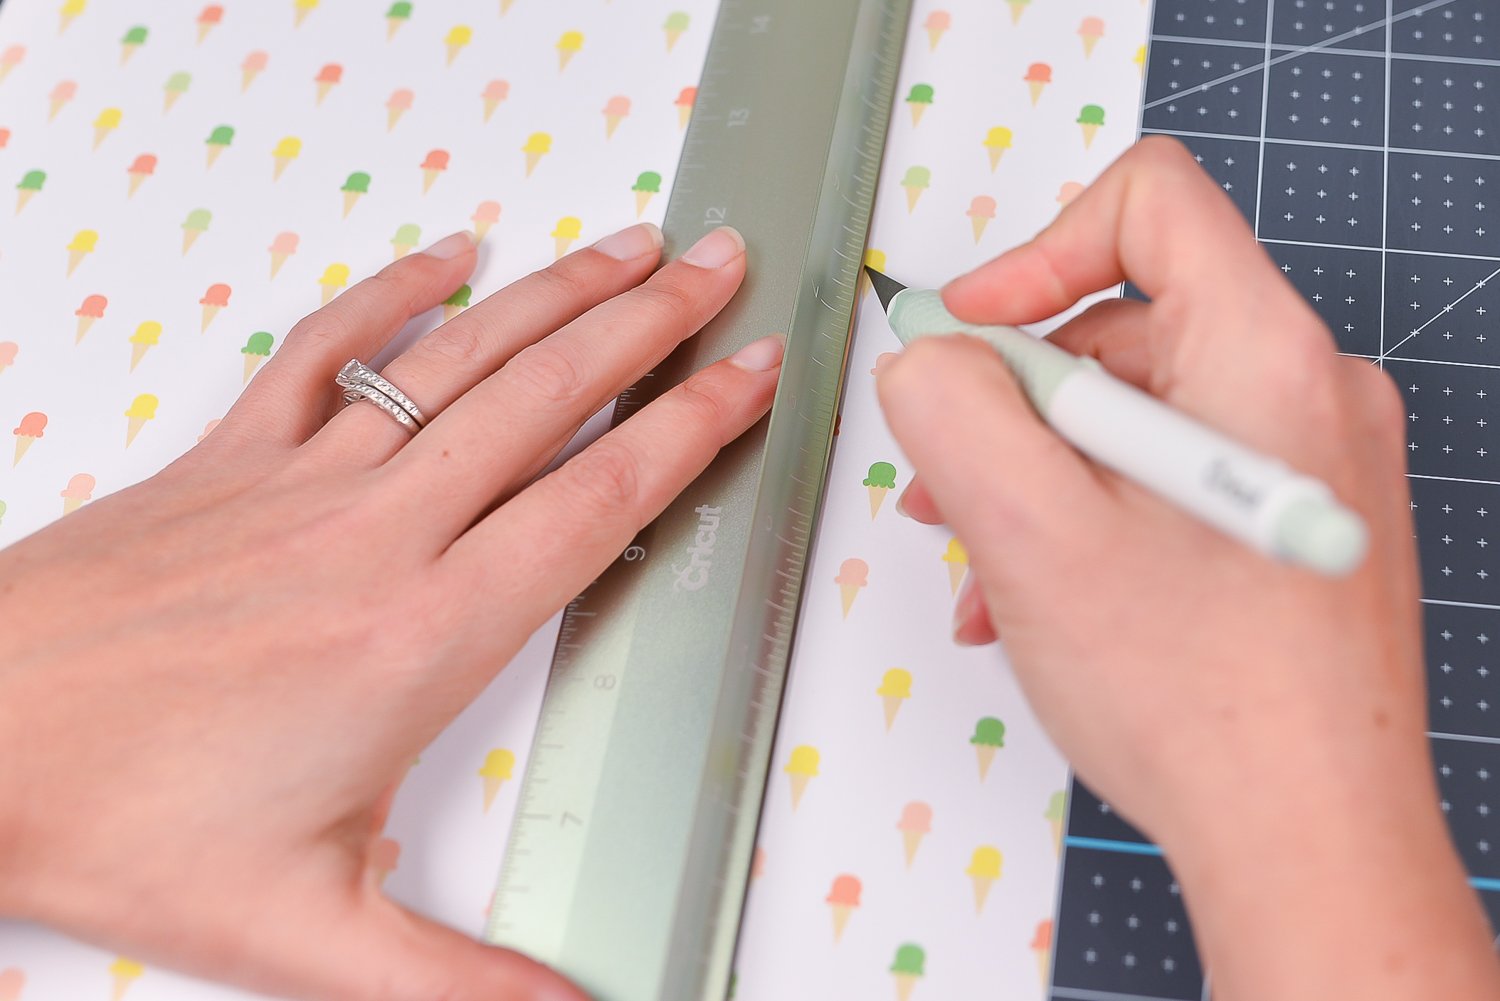 A pair of hands using the Cricut cutting ruler and the True Control knife cutting a piece of fabric on top of the Crciut self-healing mat